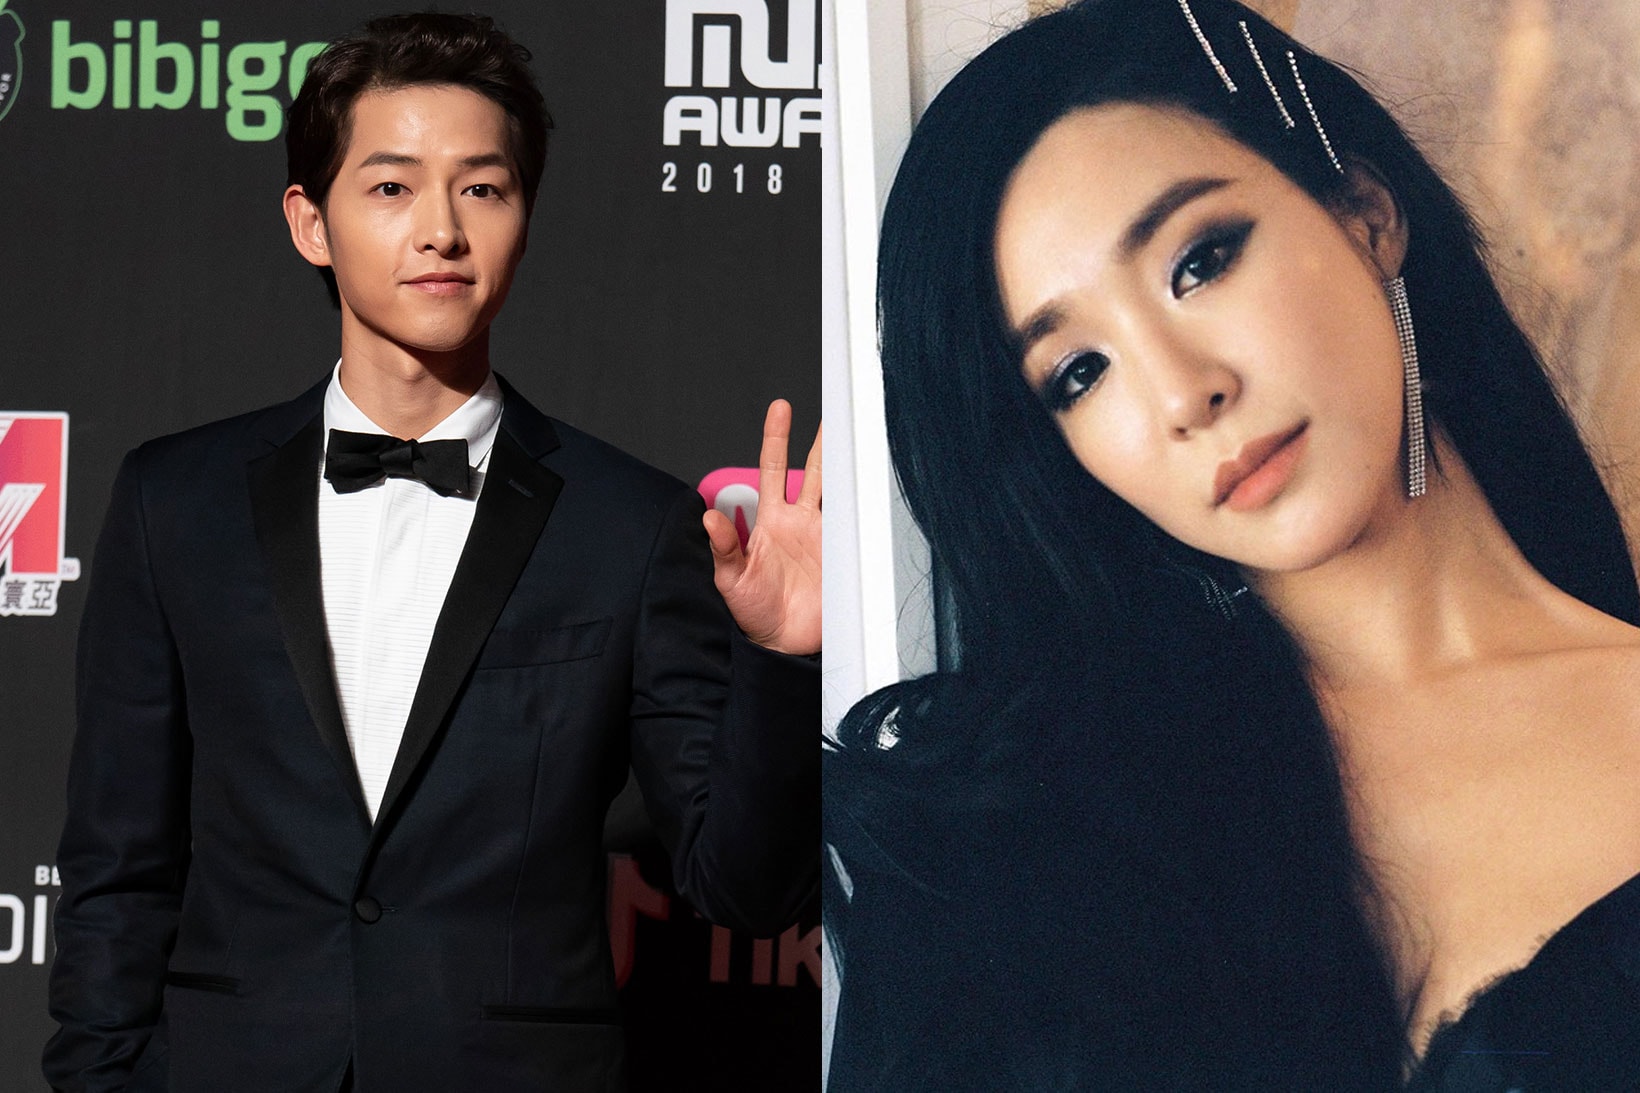 tiffany young song joongki k-drama series tv shows jtbc youngest son of the chaebol family info 